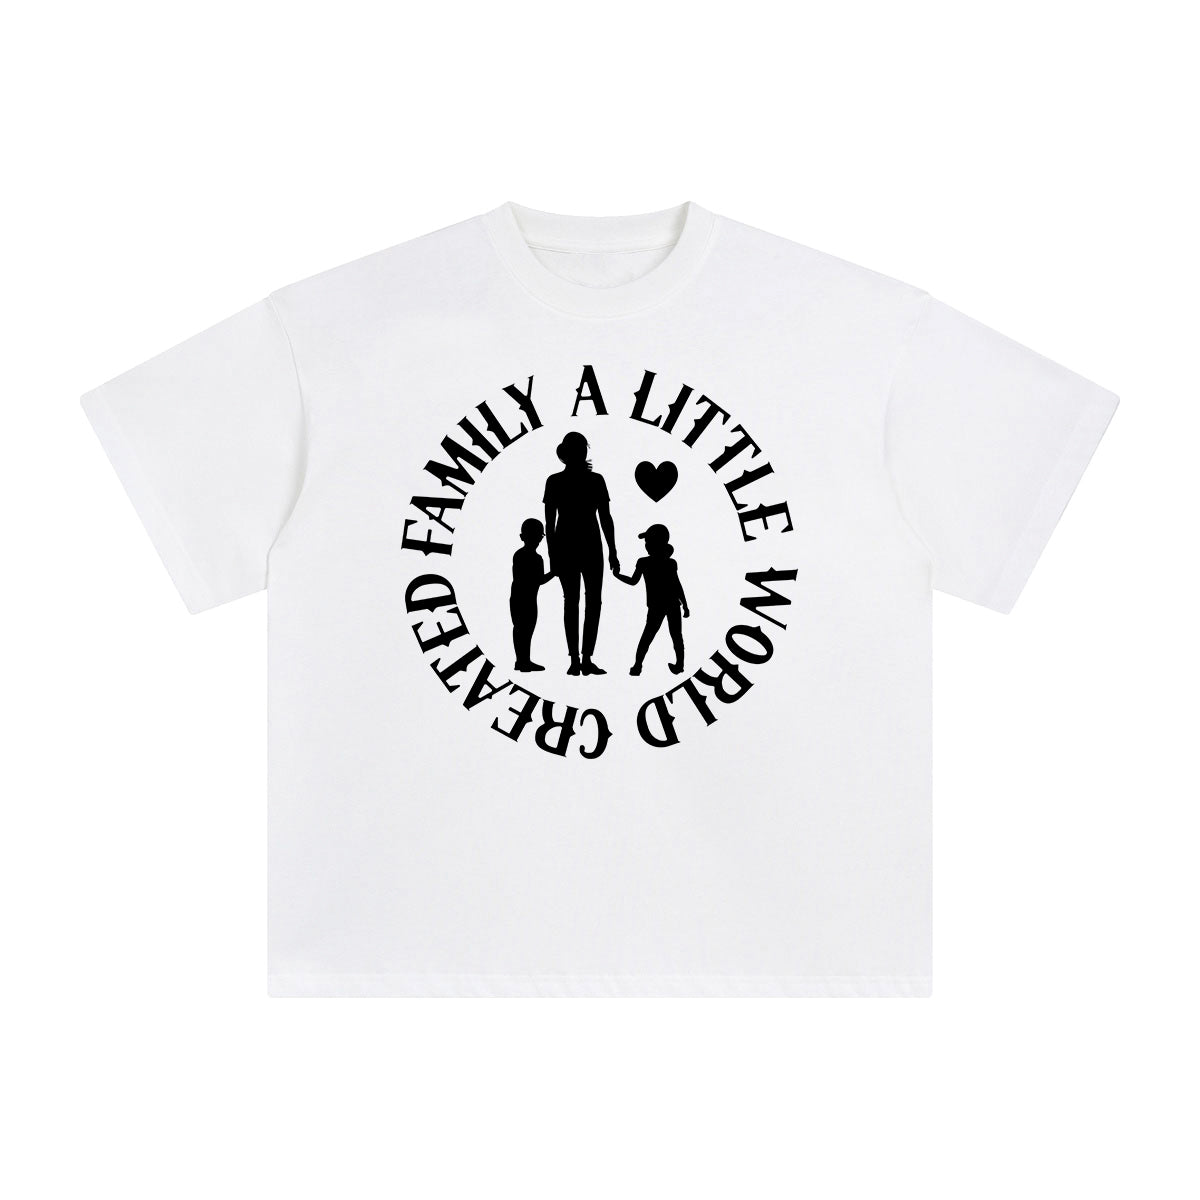 Family A Little World Created By Love Graphic Tee